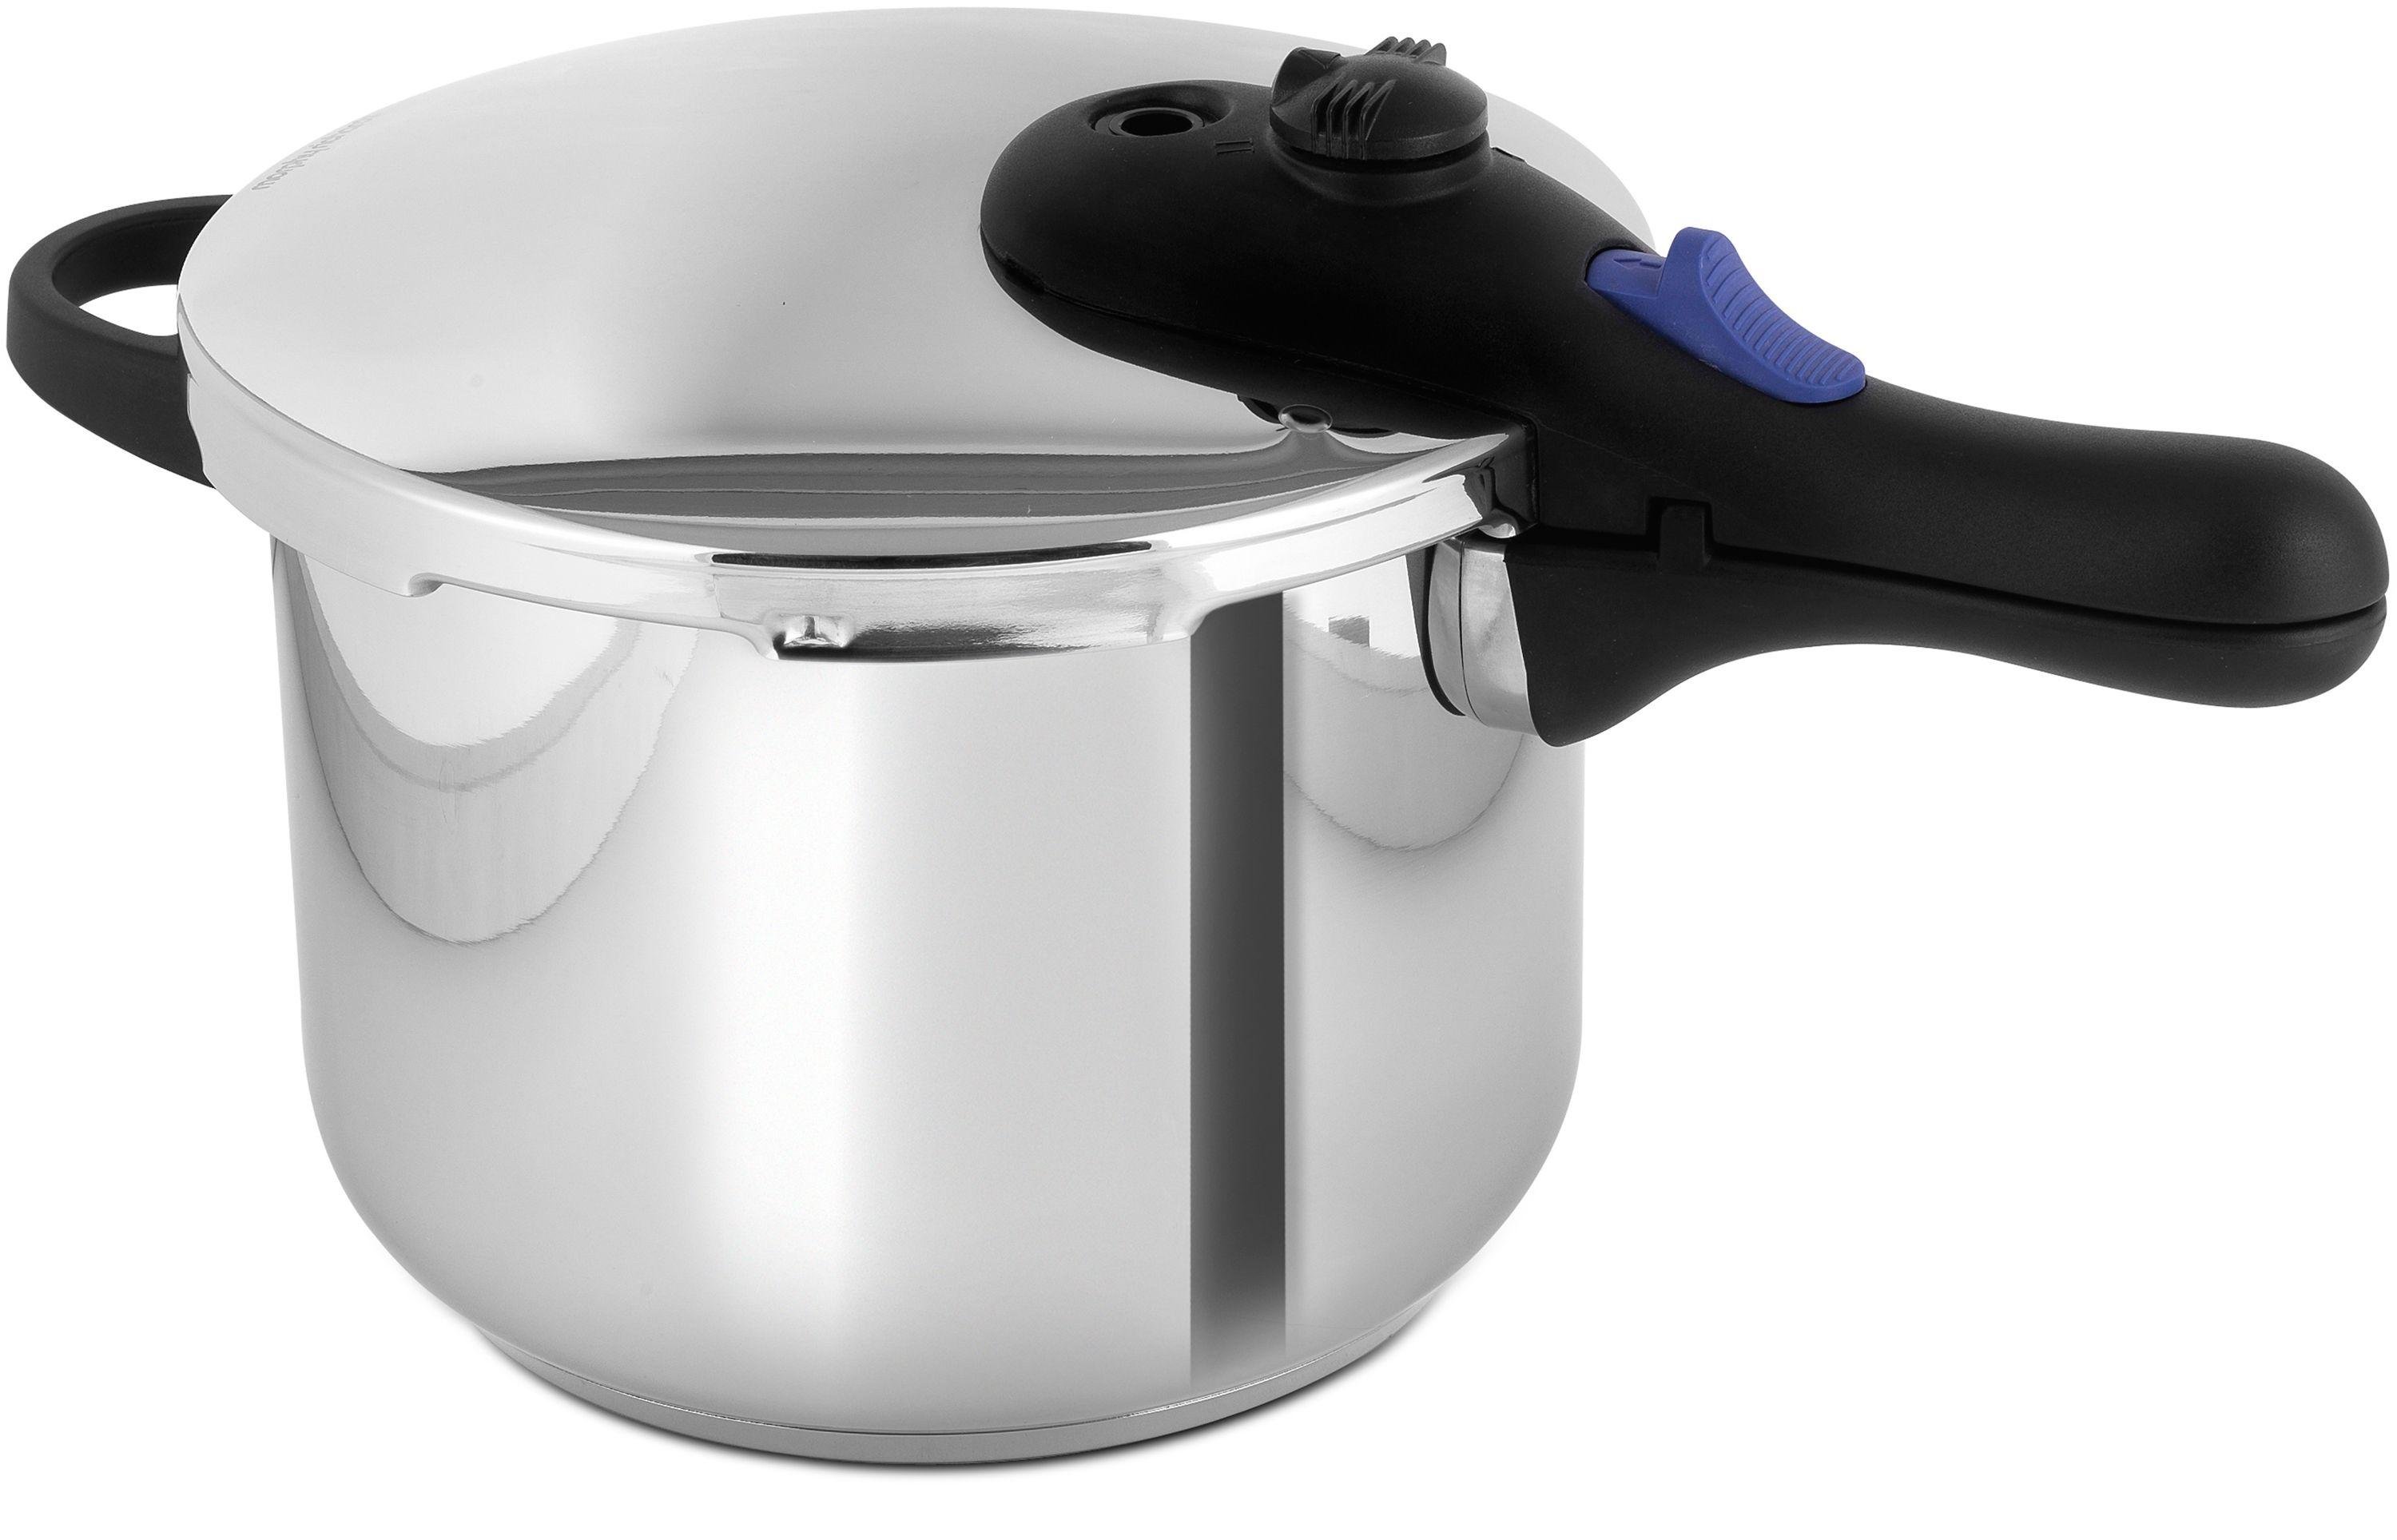 Morphy Richards Equip 2.7L Stainless Steel Pressure Cooker review